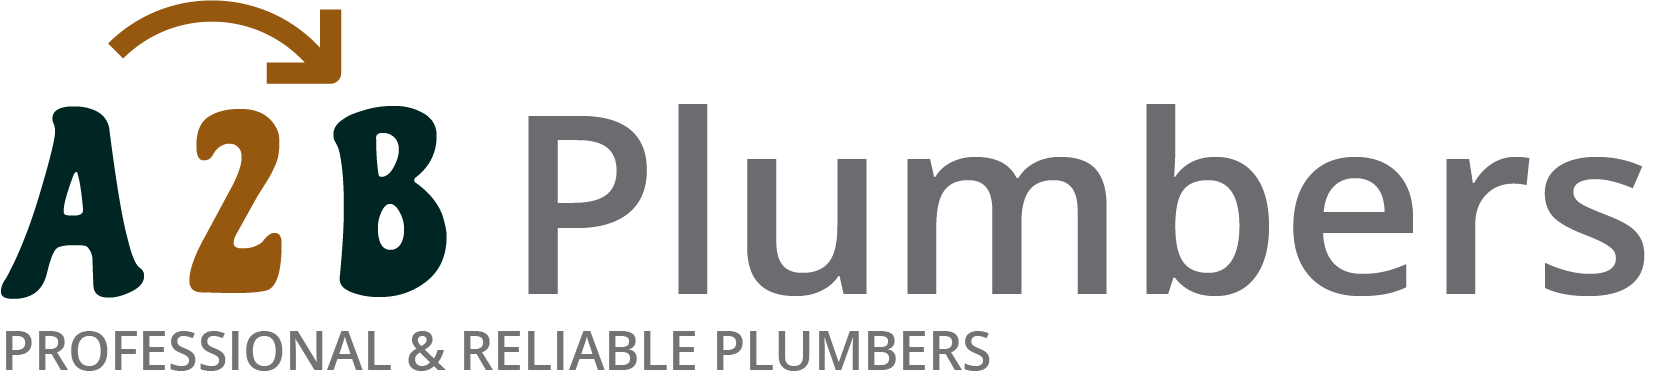 If you need a boiler installed, a radiator repaired or a leaking tap fixed, call us now - we provide services for properties in Peterhead and the local area.